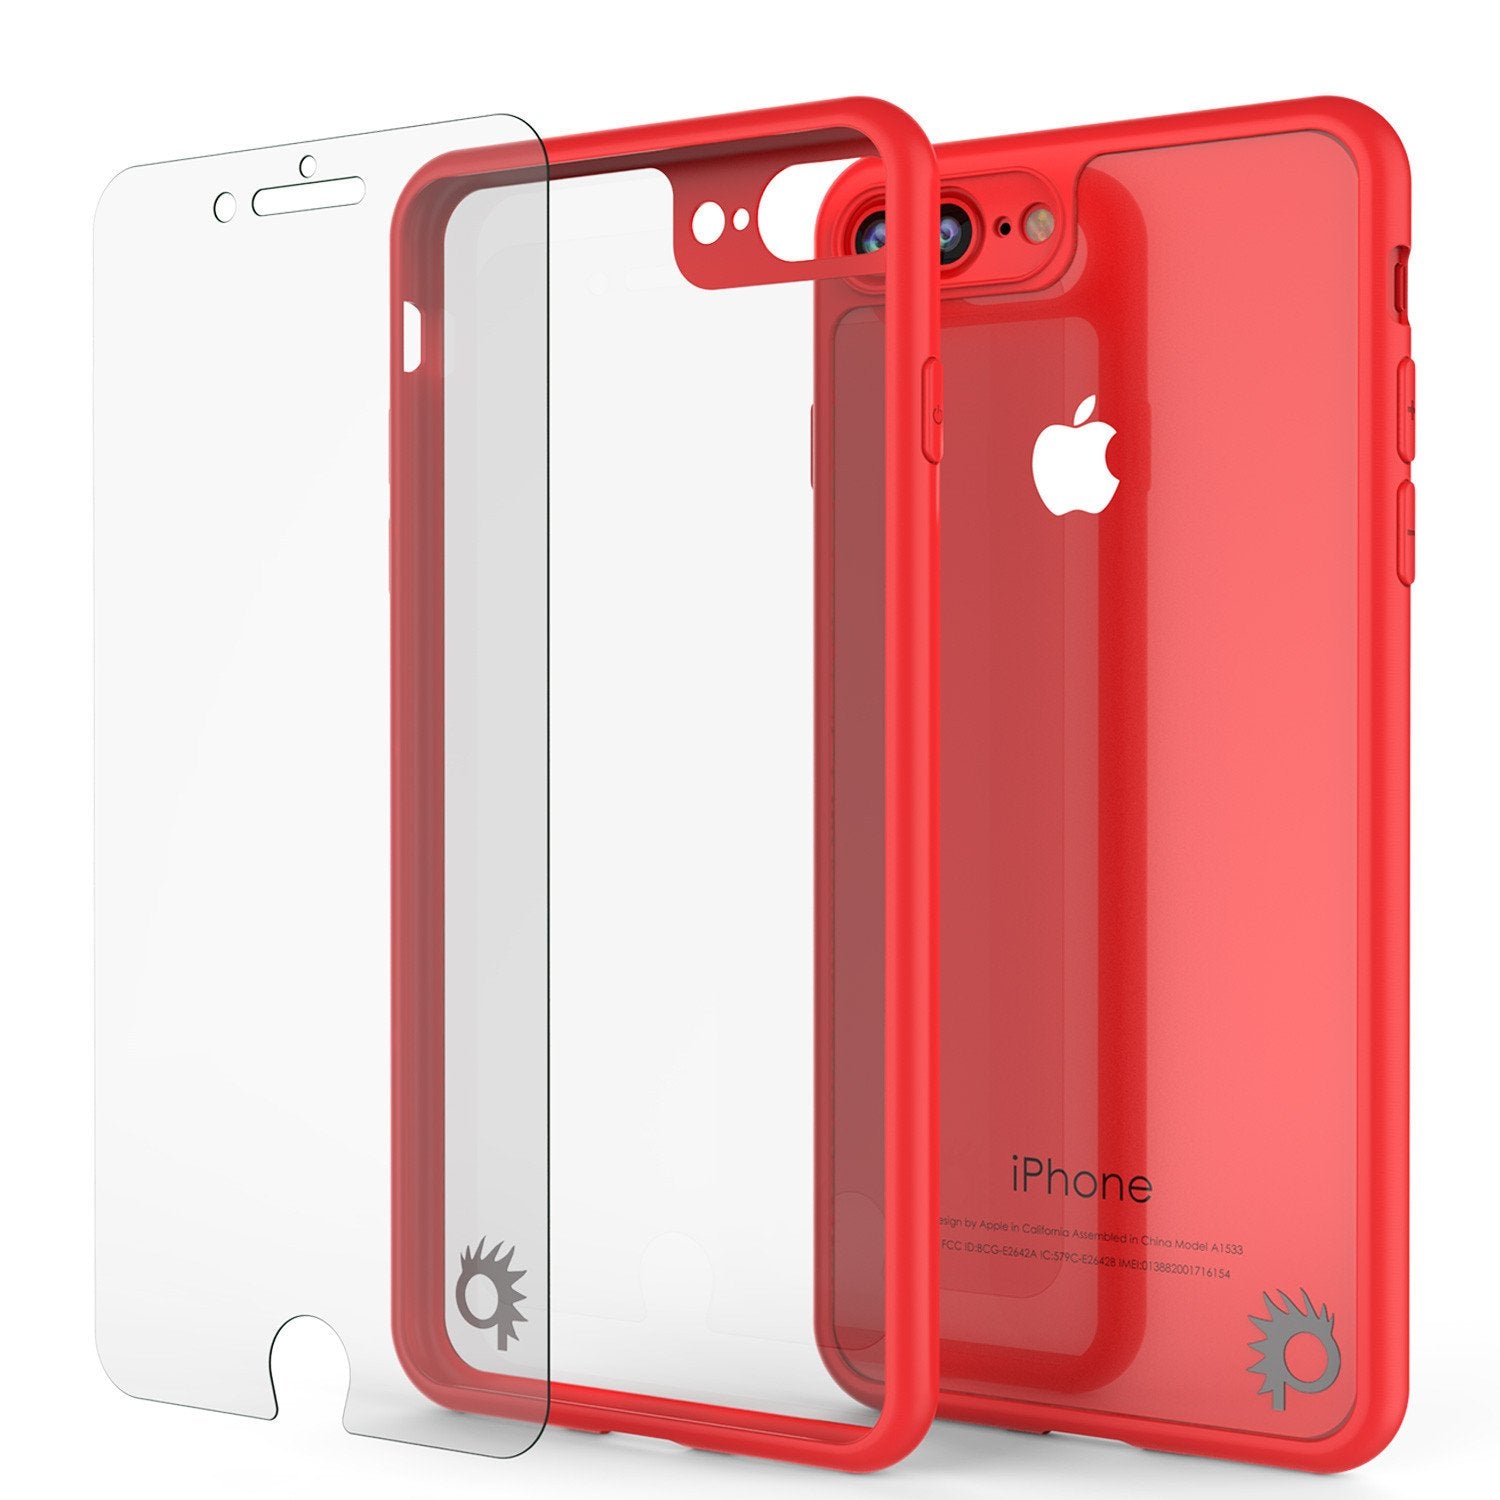 iPhone 7 PLUS Case, Punkcase [MASK Series] [RED] Full Body Hybrid Dual Layer TPU Cover [Clear Back] [Non Slip] [Ultra Thin Fit] W/ protective Tempered Glass Screen Protector for Apple iPhone 7s PLUS